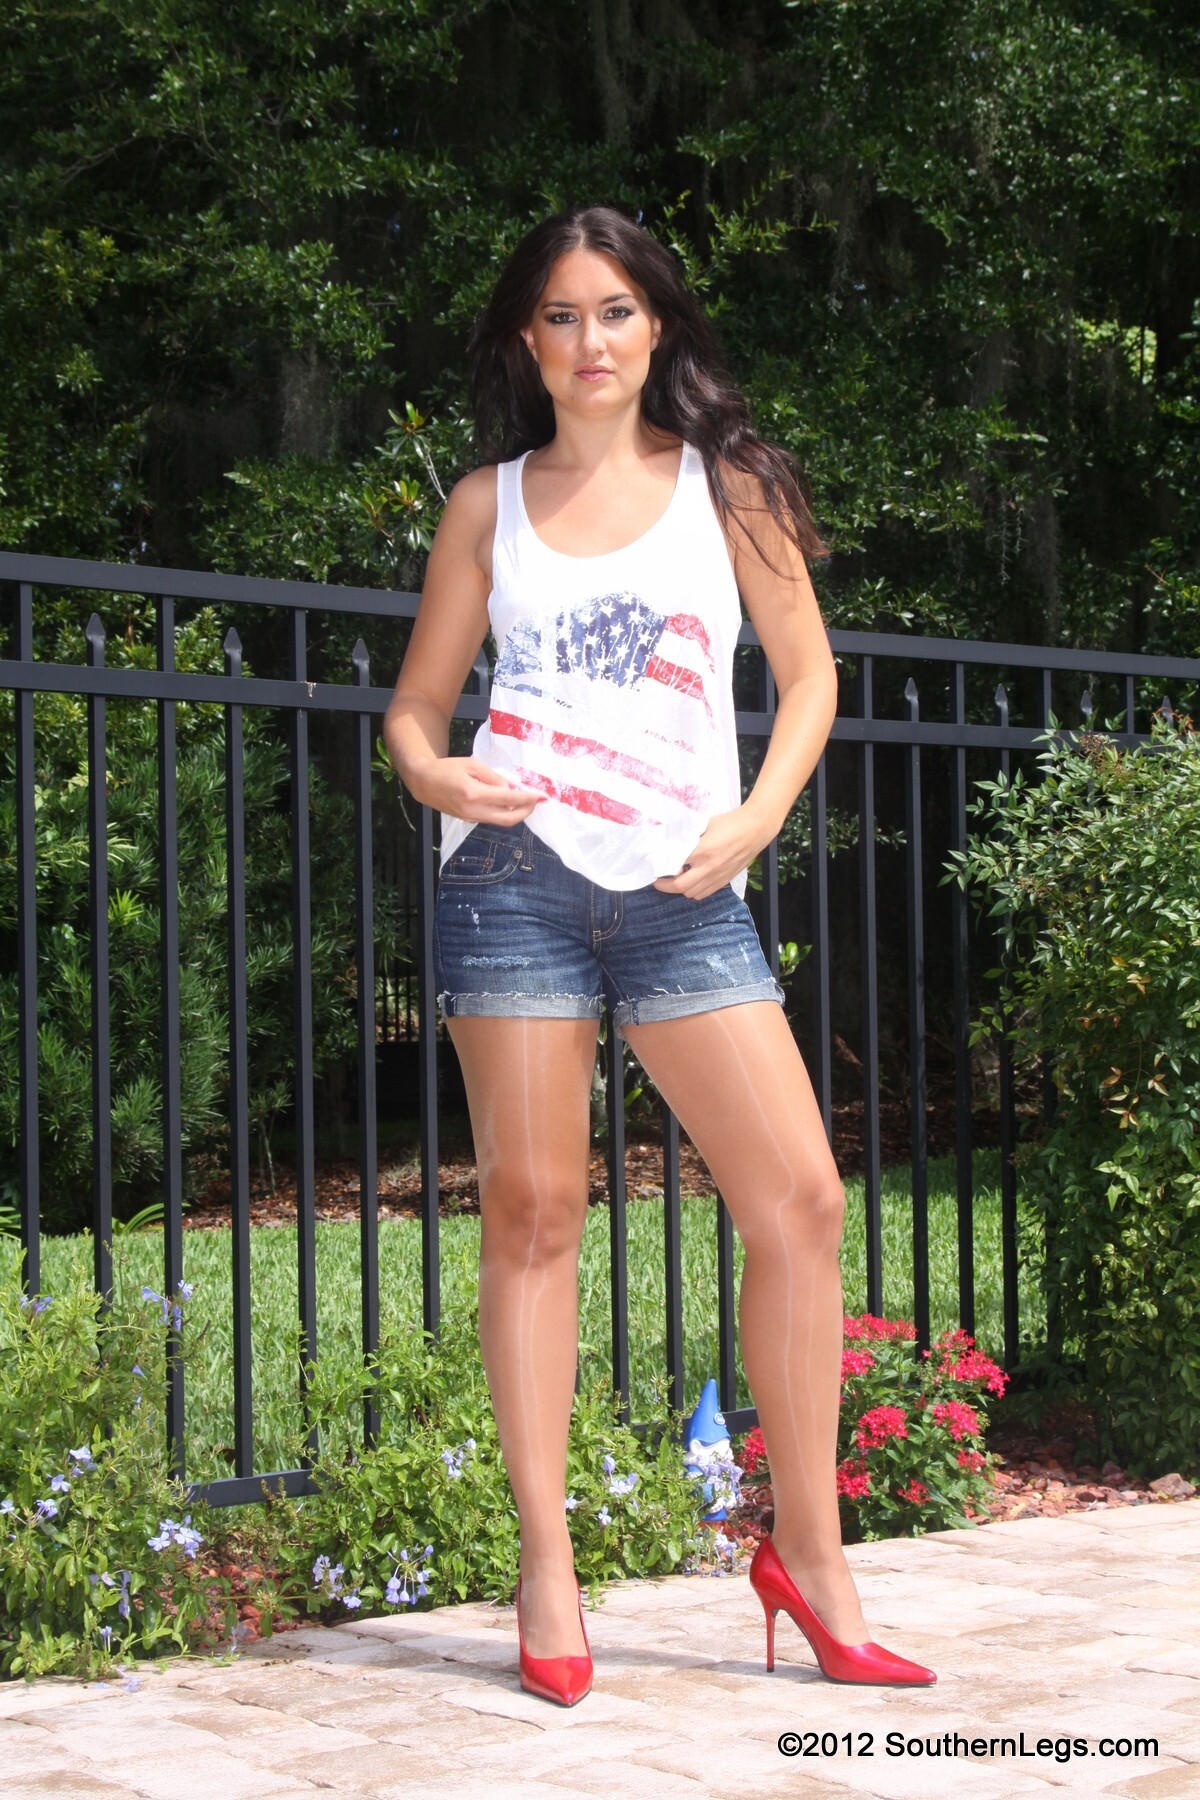 Southernlegs European and American high definition photo 9-3-12 Elena